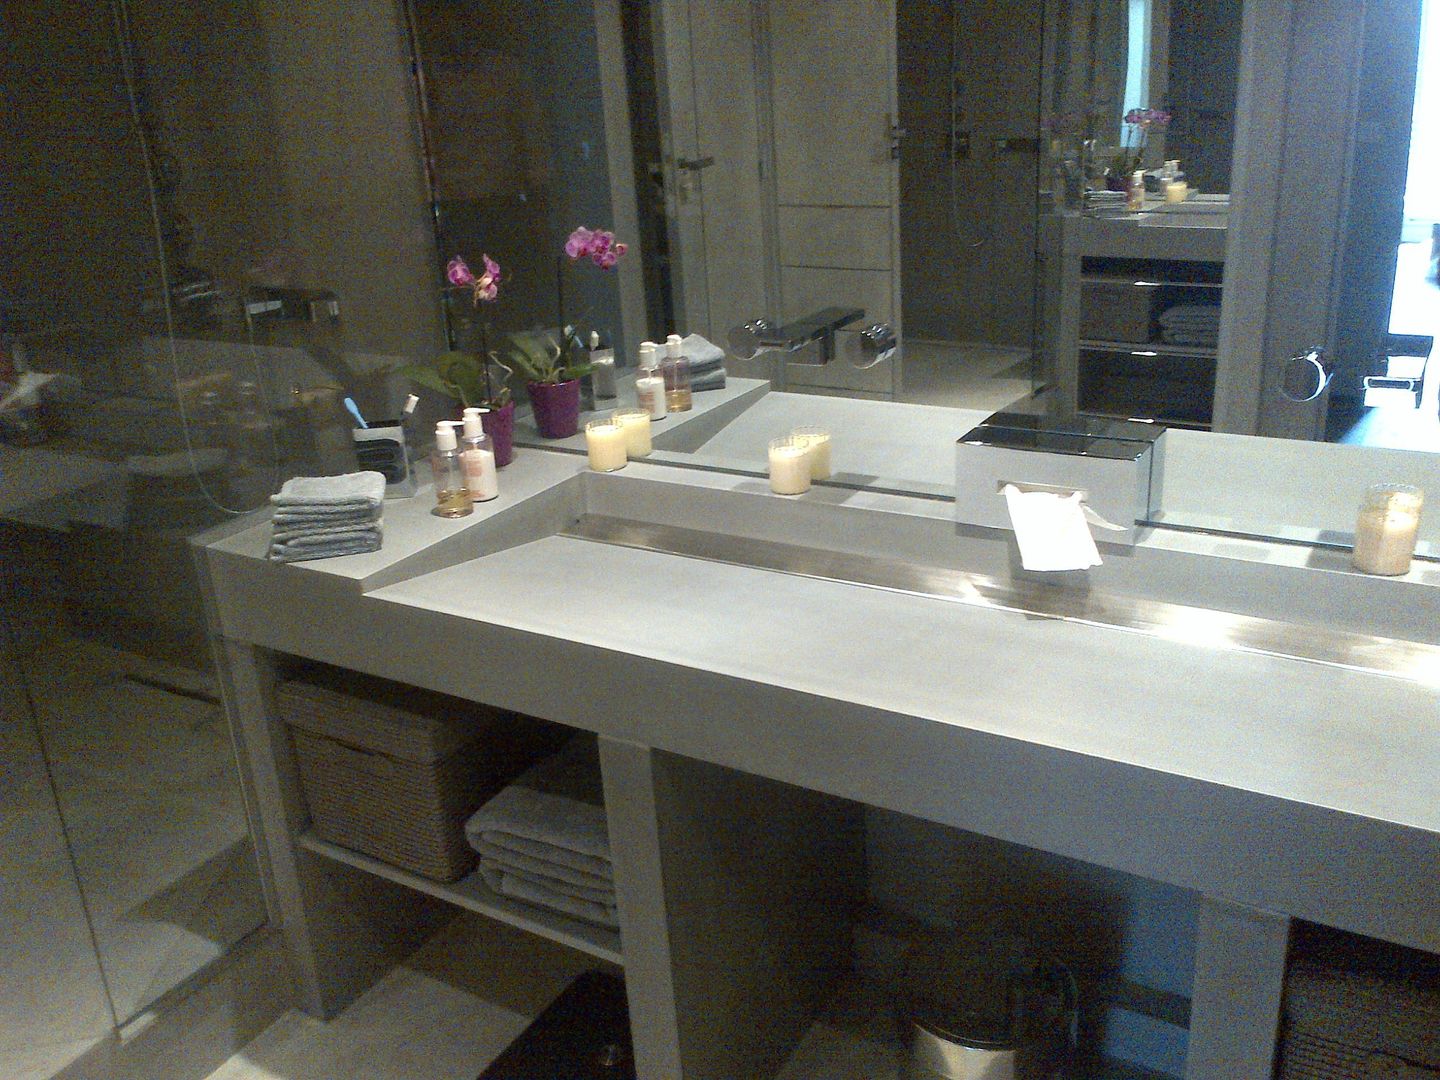 Concrete sinks & Brushed stainless steel Concrete LCDA Modern Bathroom concrete sink,concrete bathroom,bespoke sink,bespoke bathroom